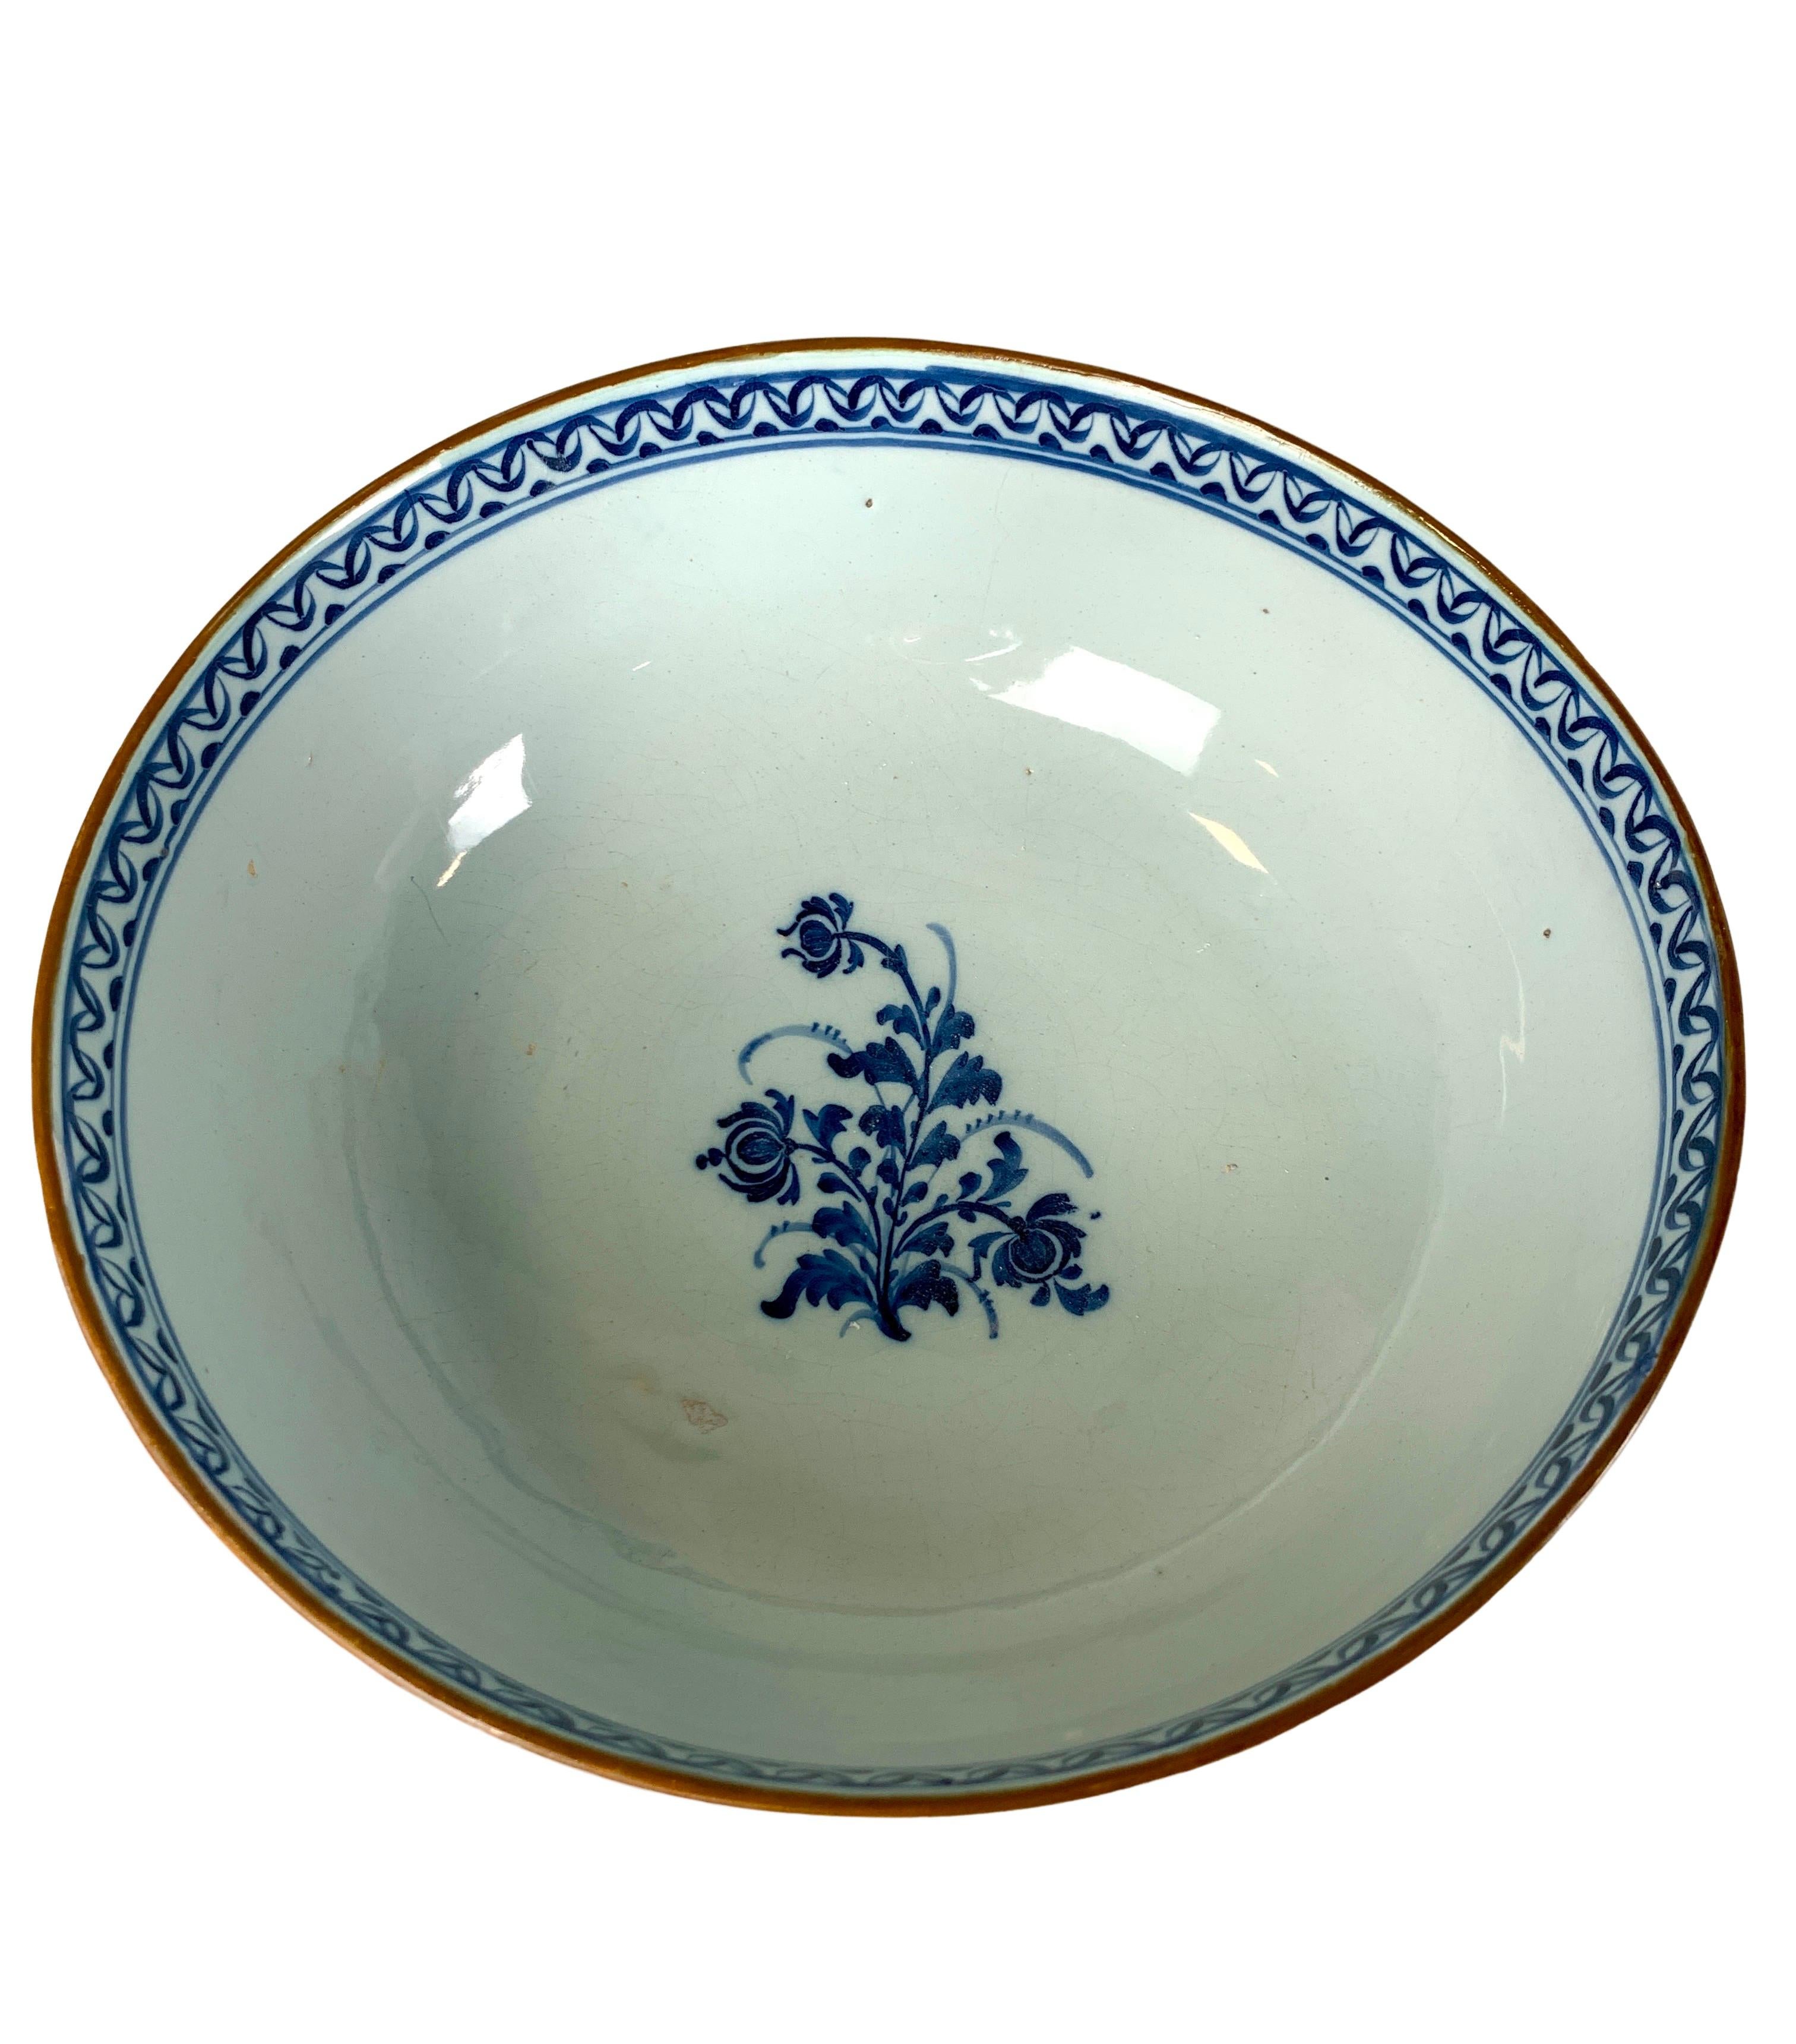 Blue and White Delft Punch Bowl Hand Painted Mid 18th Century Netherlands For Sale 1